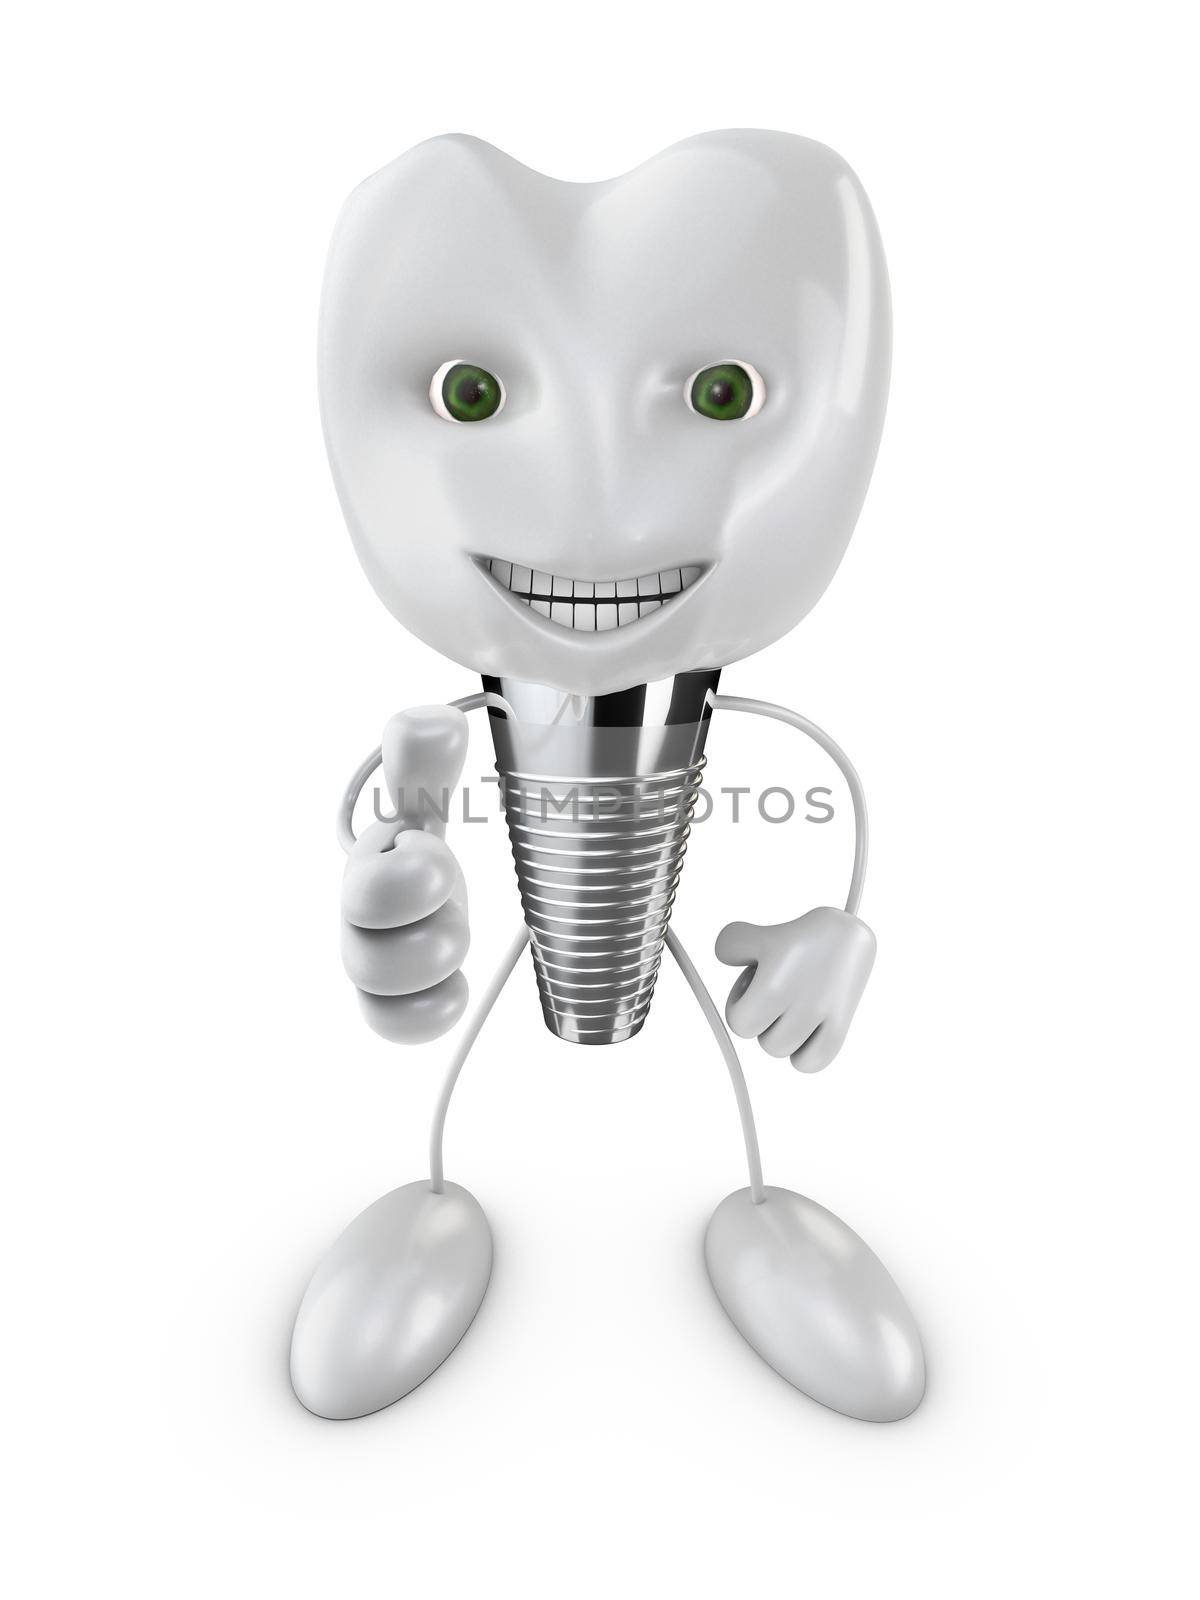 dental implant with the eyes indicates a hand gesture on white background